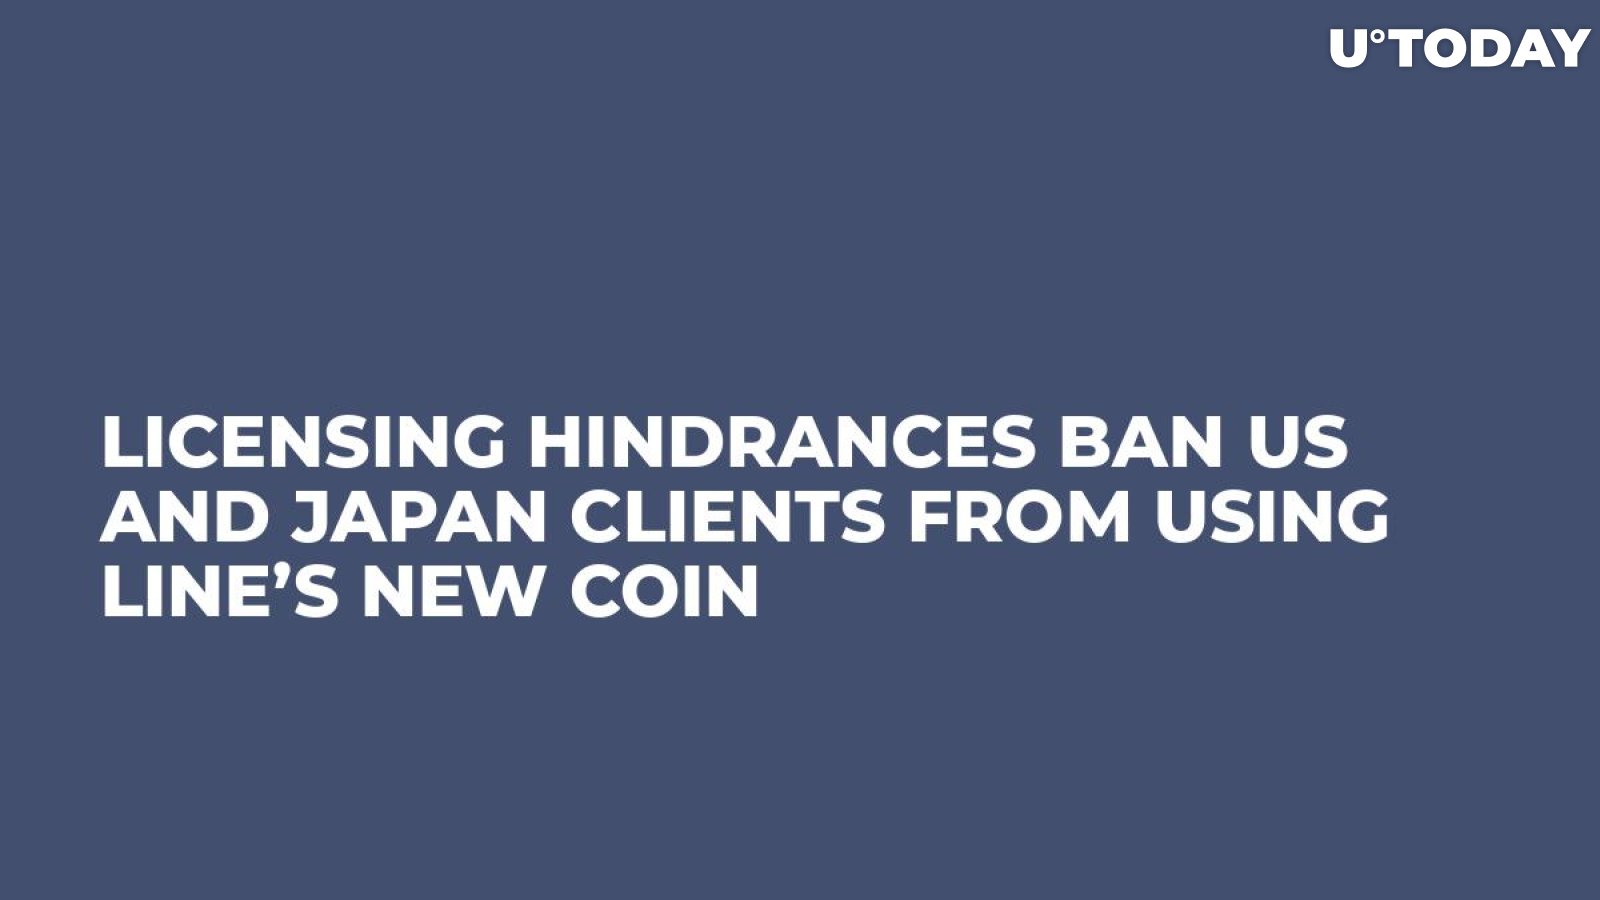 Licensing Hindrances Ban US and Japan Clients From Using LINE’s New Coin